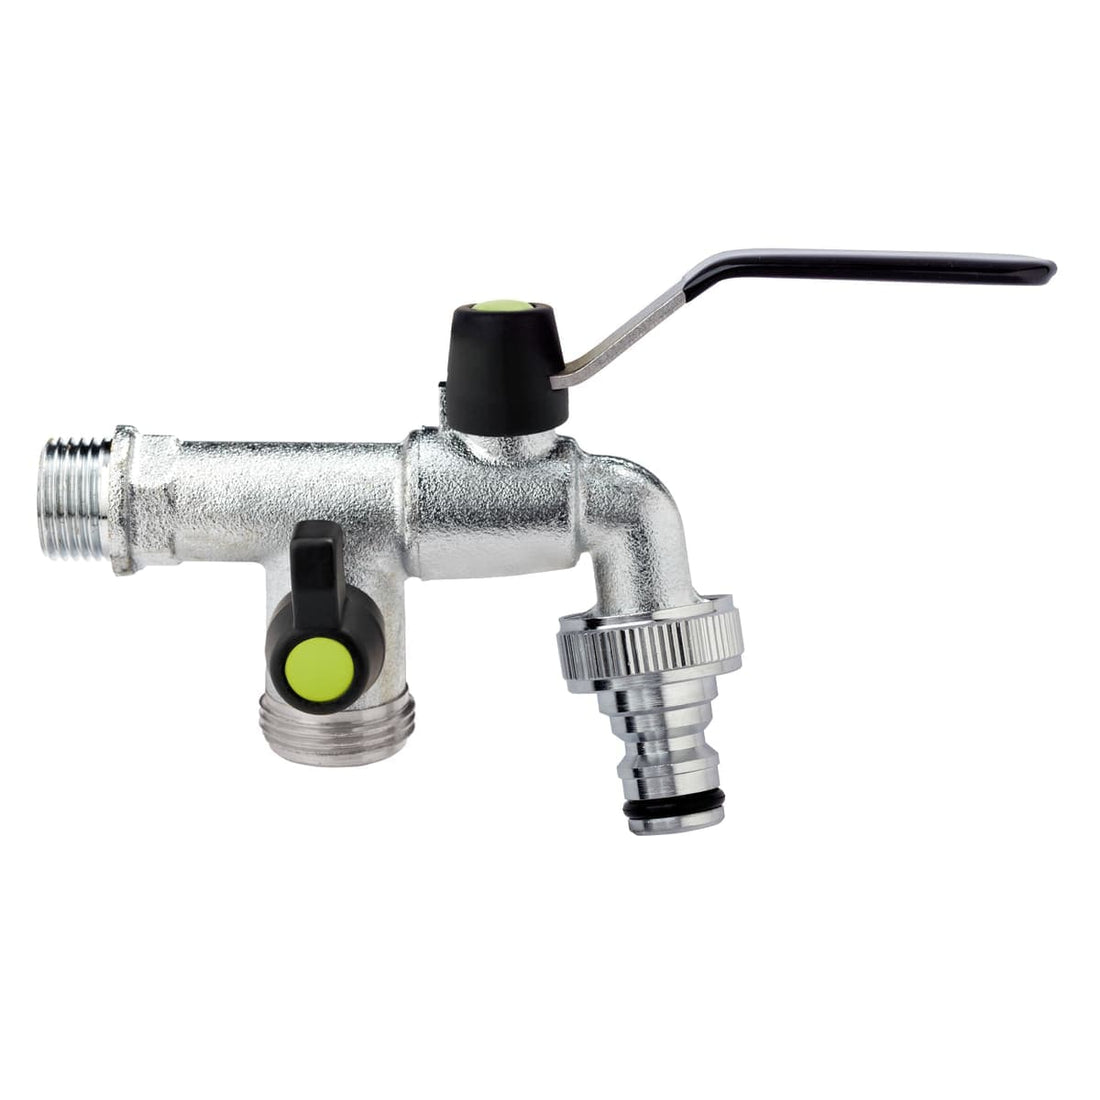 GARDEN BALL VALVE WITH 2 OUTLETS